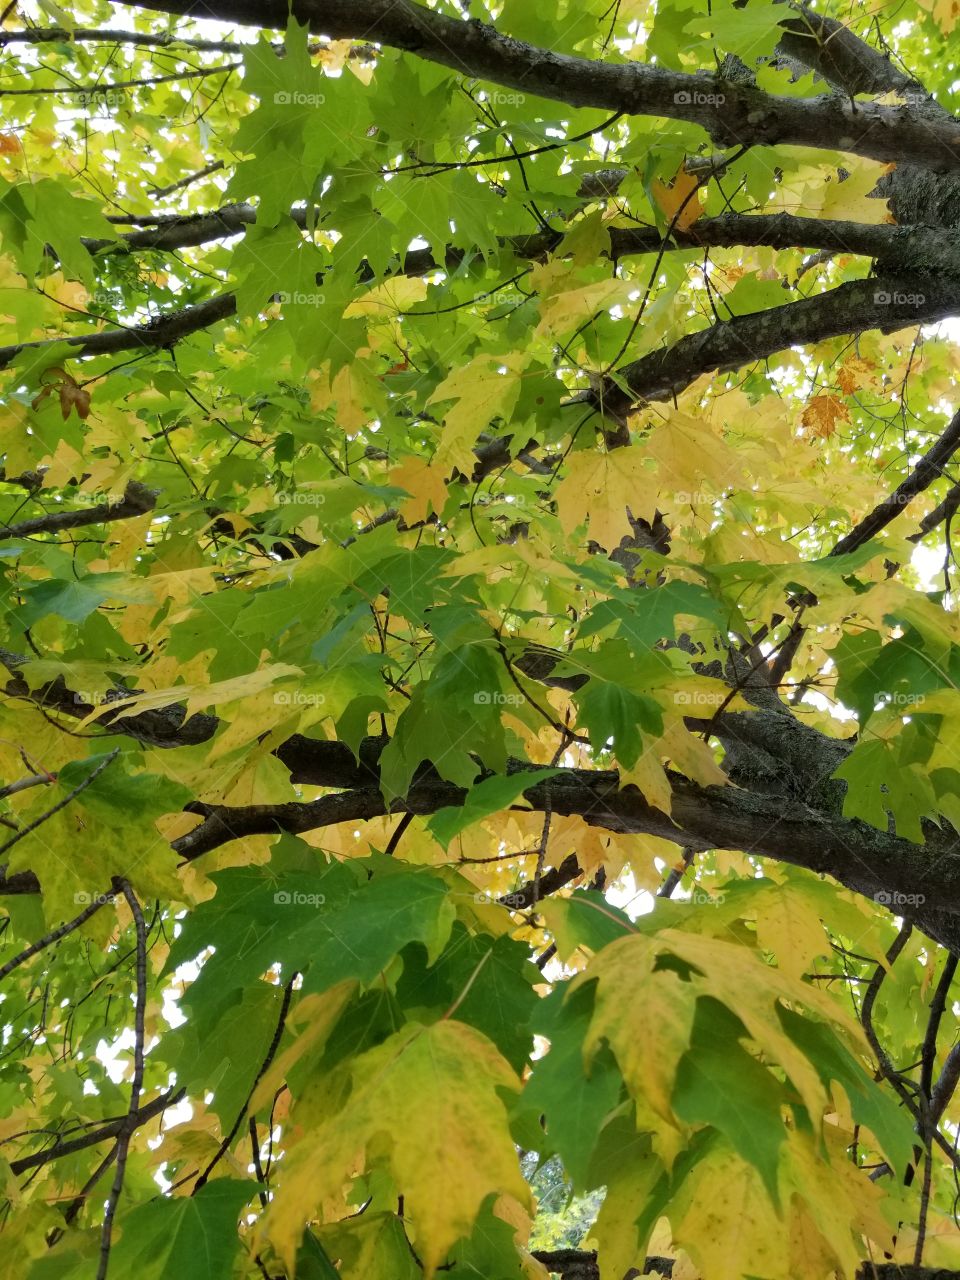 Change leaves on a maple tree.